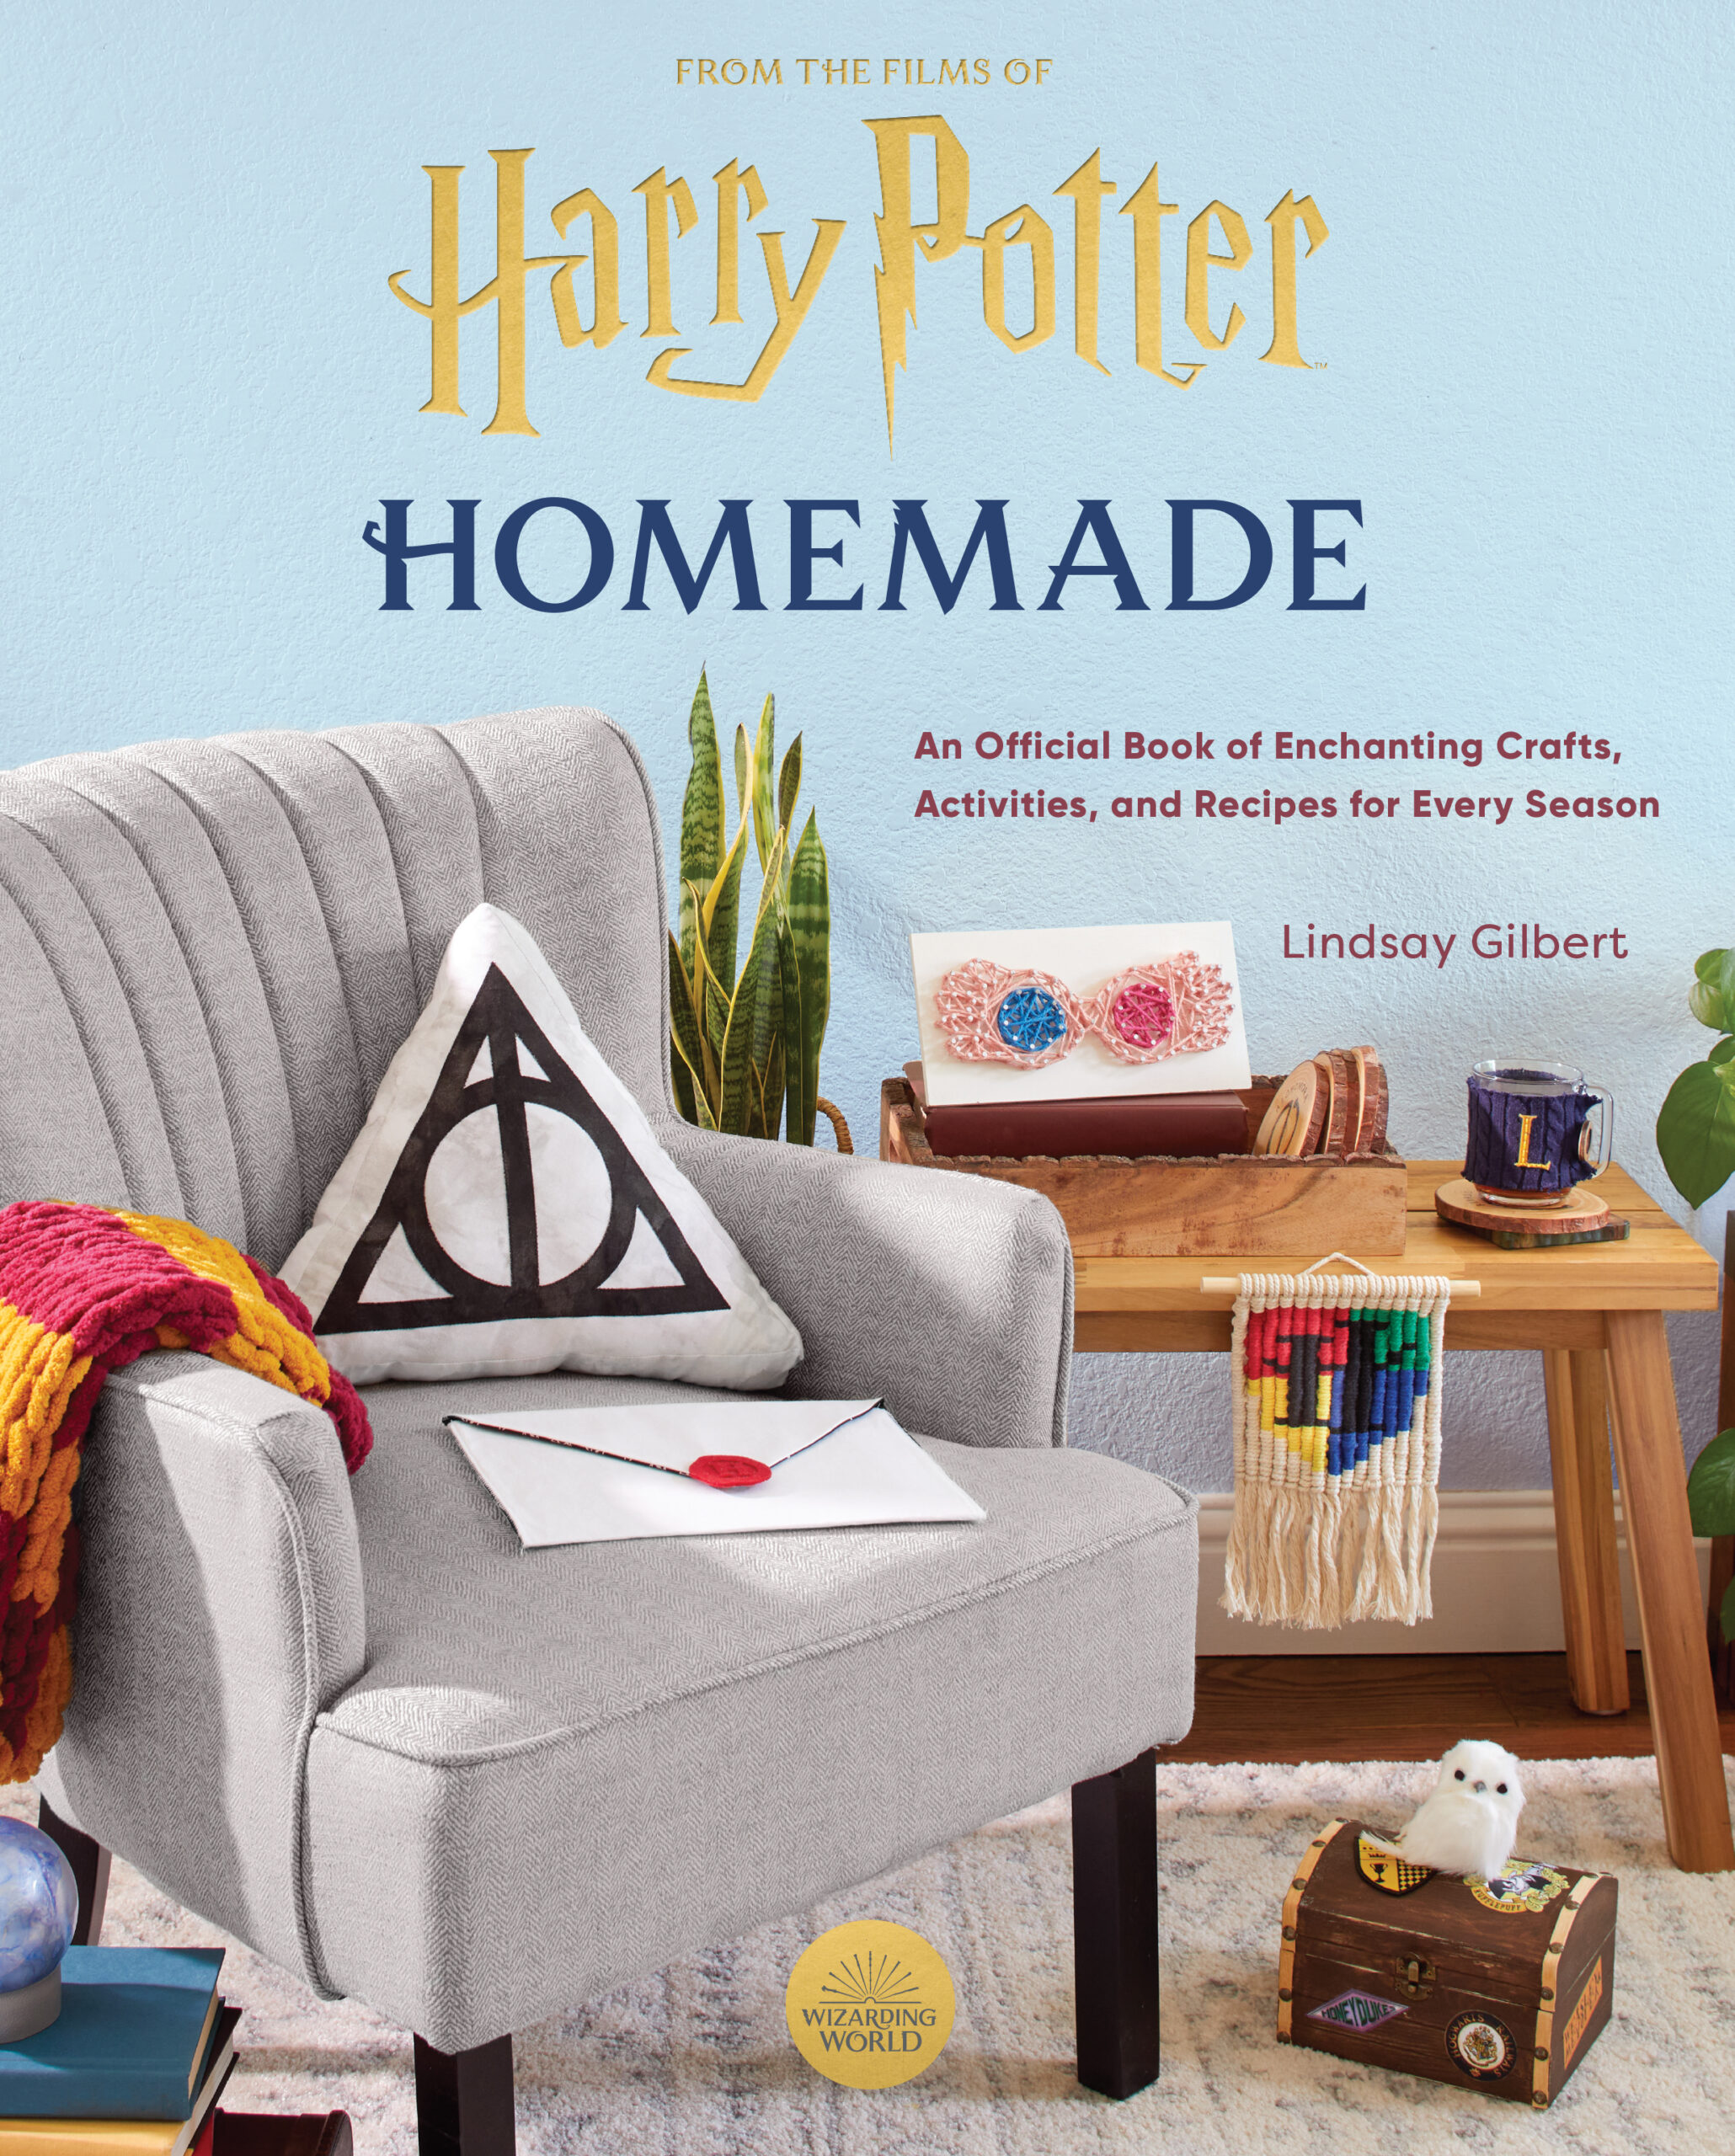 “Harry Potter: Homemade” will be released on October 11.